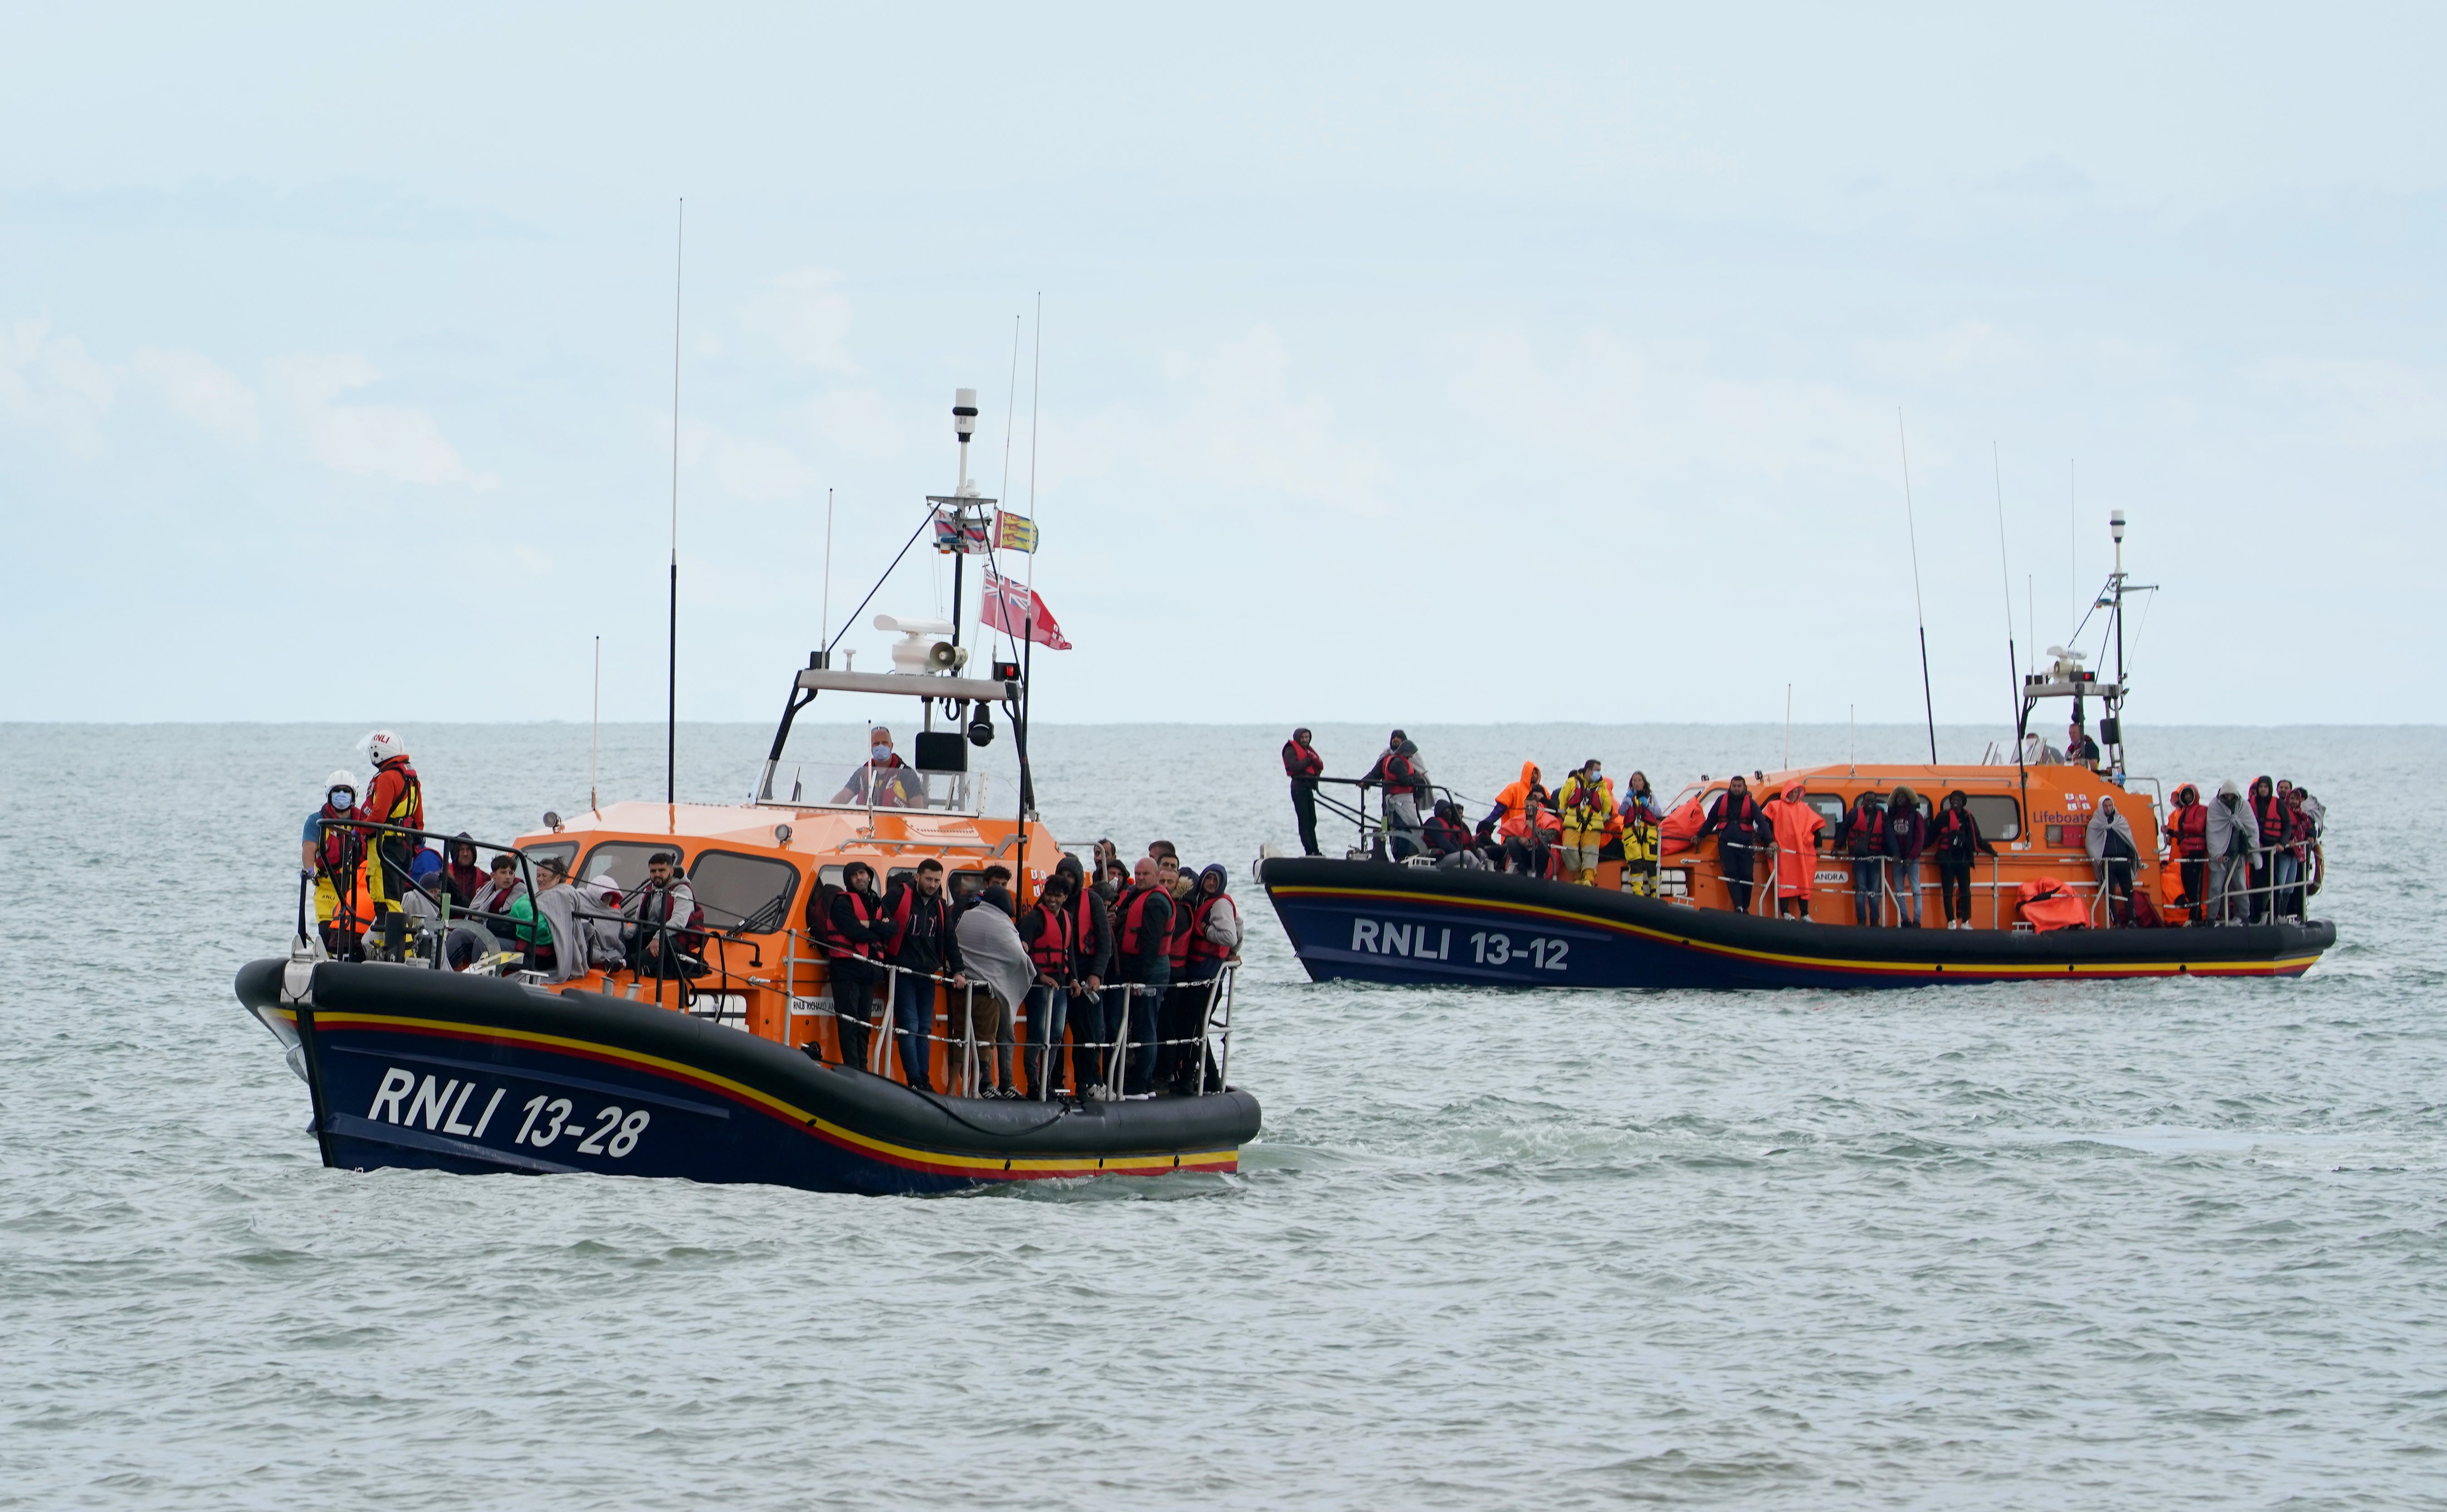 Dungeness and Hastings Lifeboats carrying groups of people thought to be migrants into Dungeness, Kent (Gareth Fuller/PA)